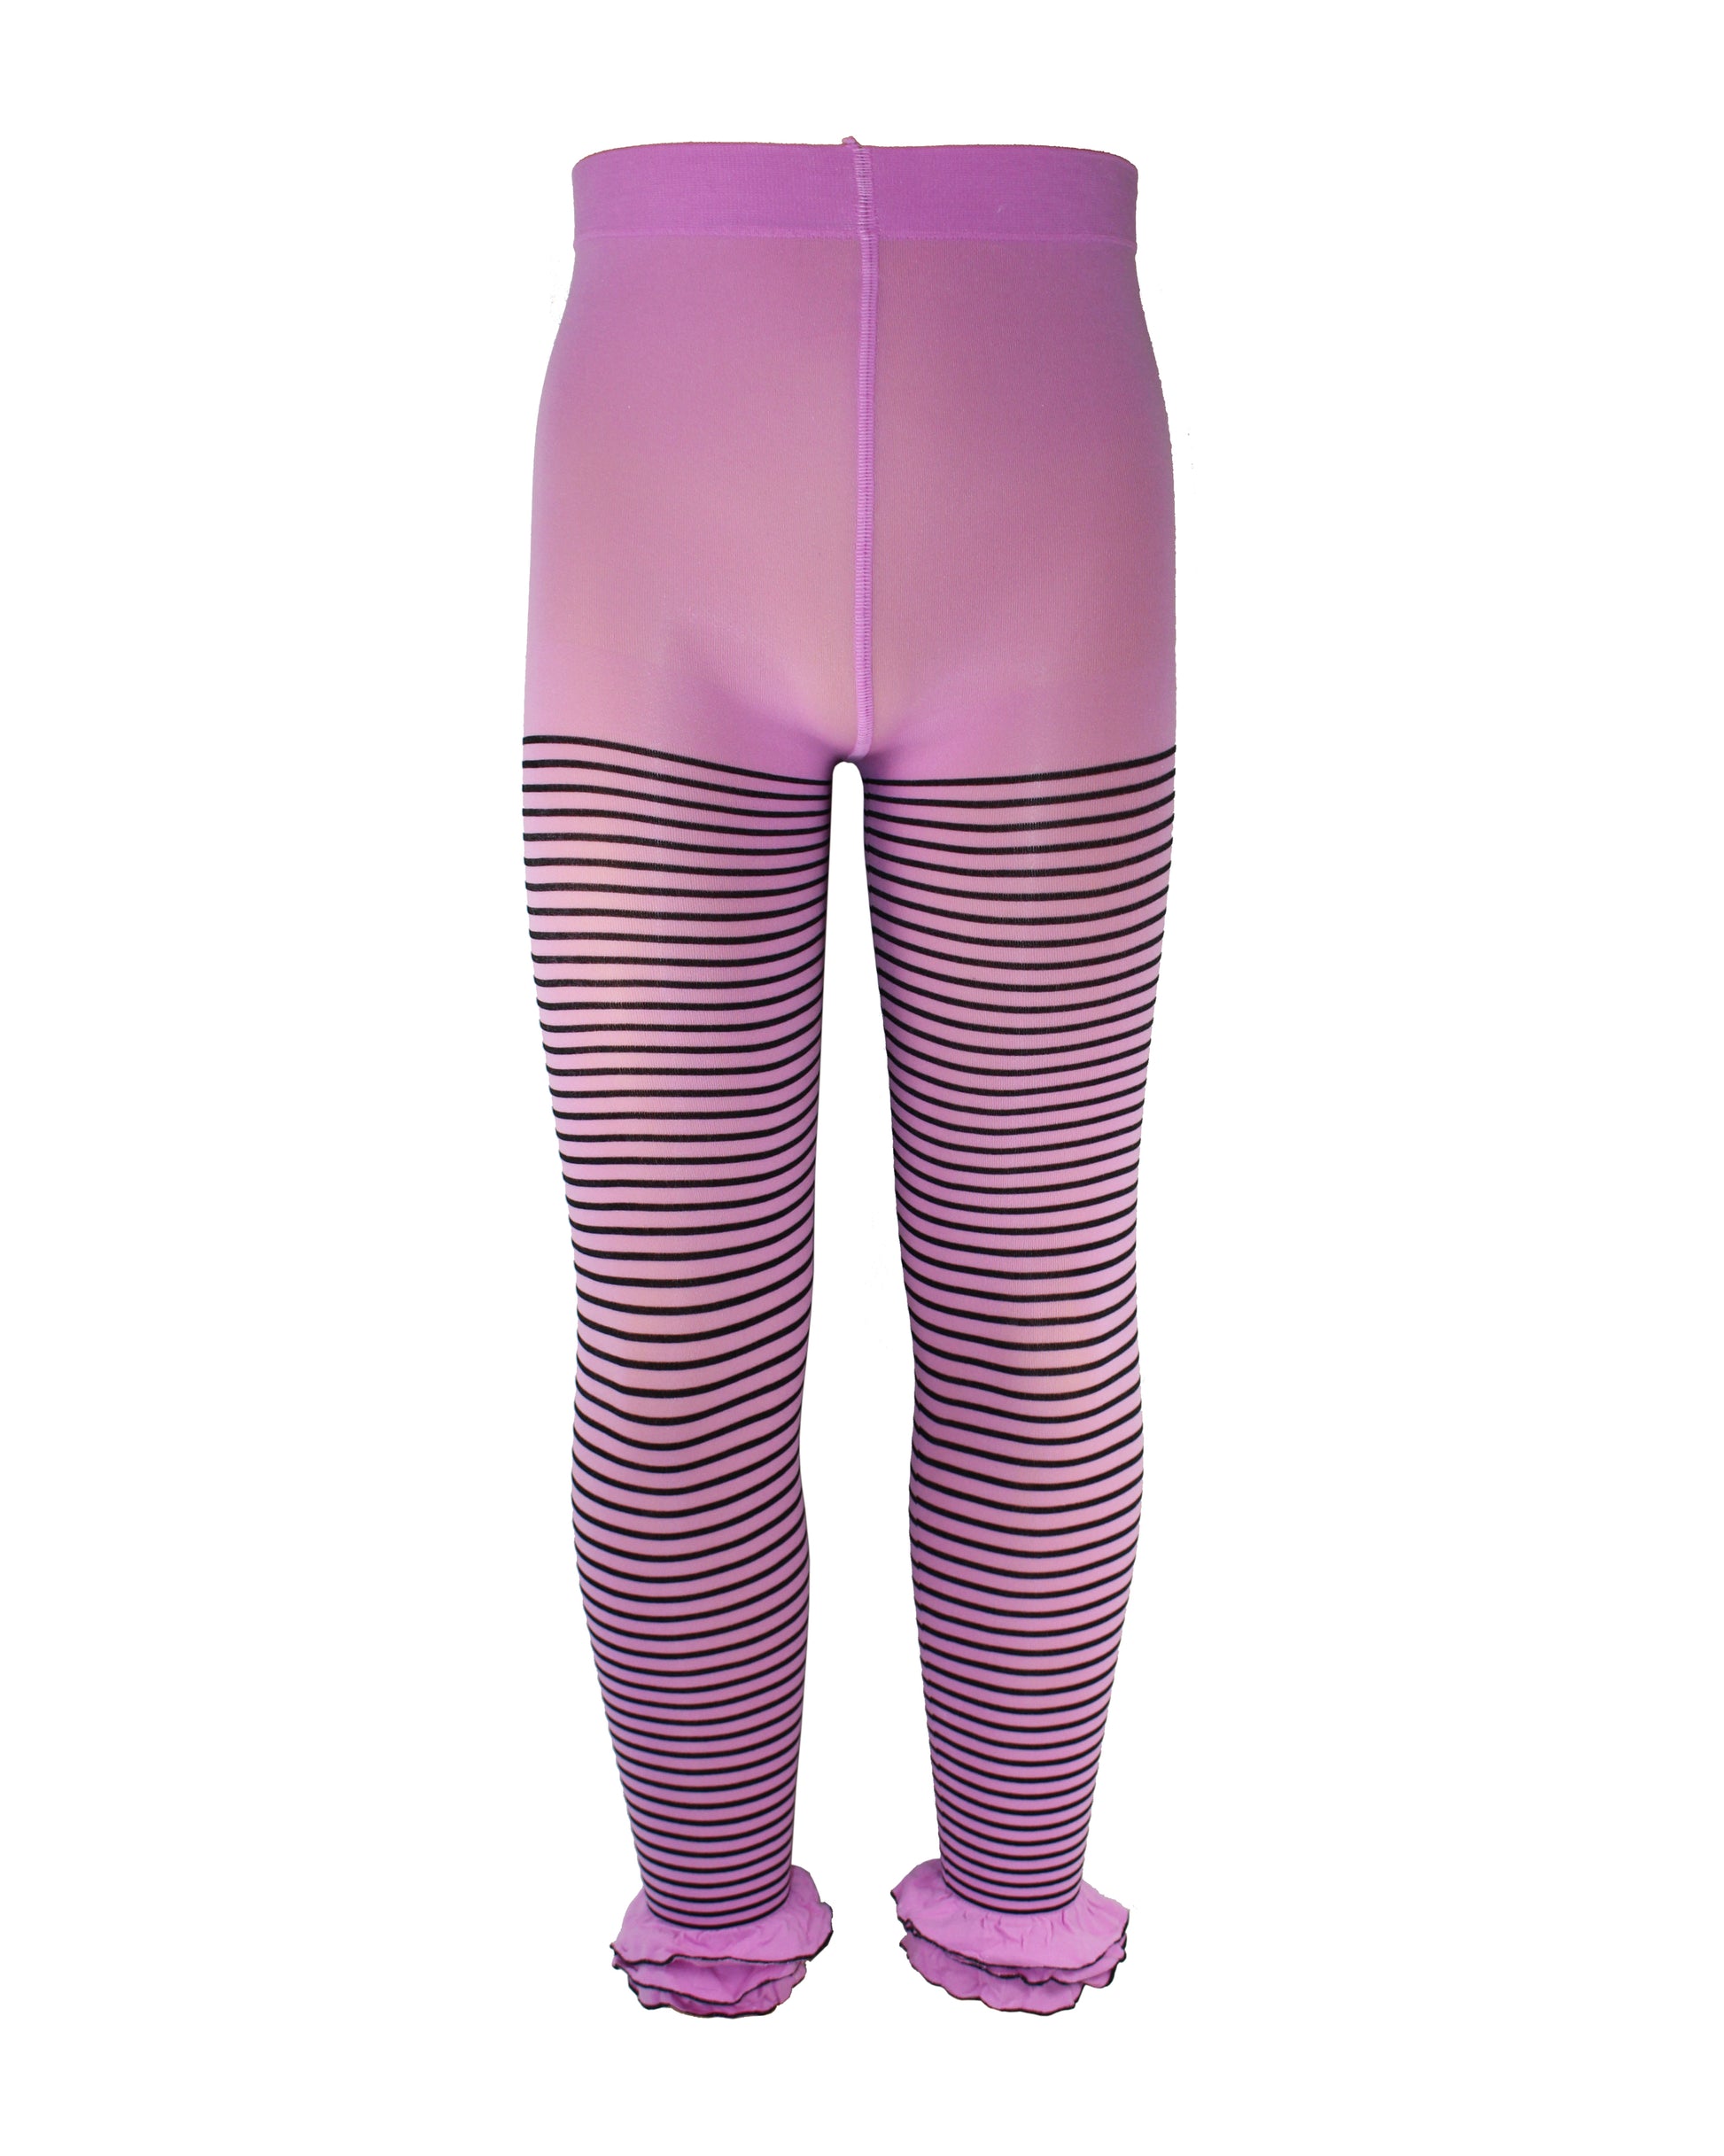 Omsa St. Tropez Leggings - Soft mauve pink opaque kid's footless tights with a black horizontal stripe pattern and frilly ruched cuff.